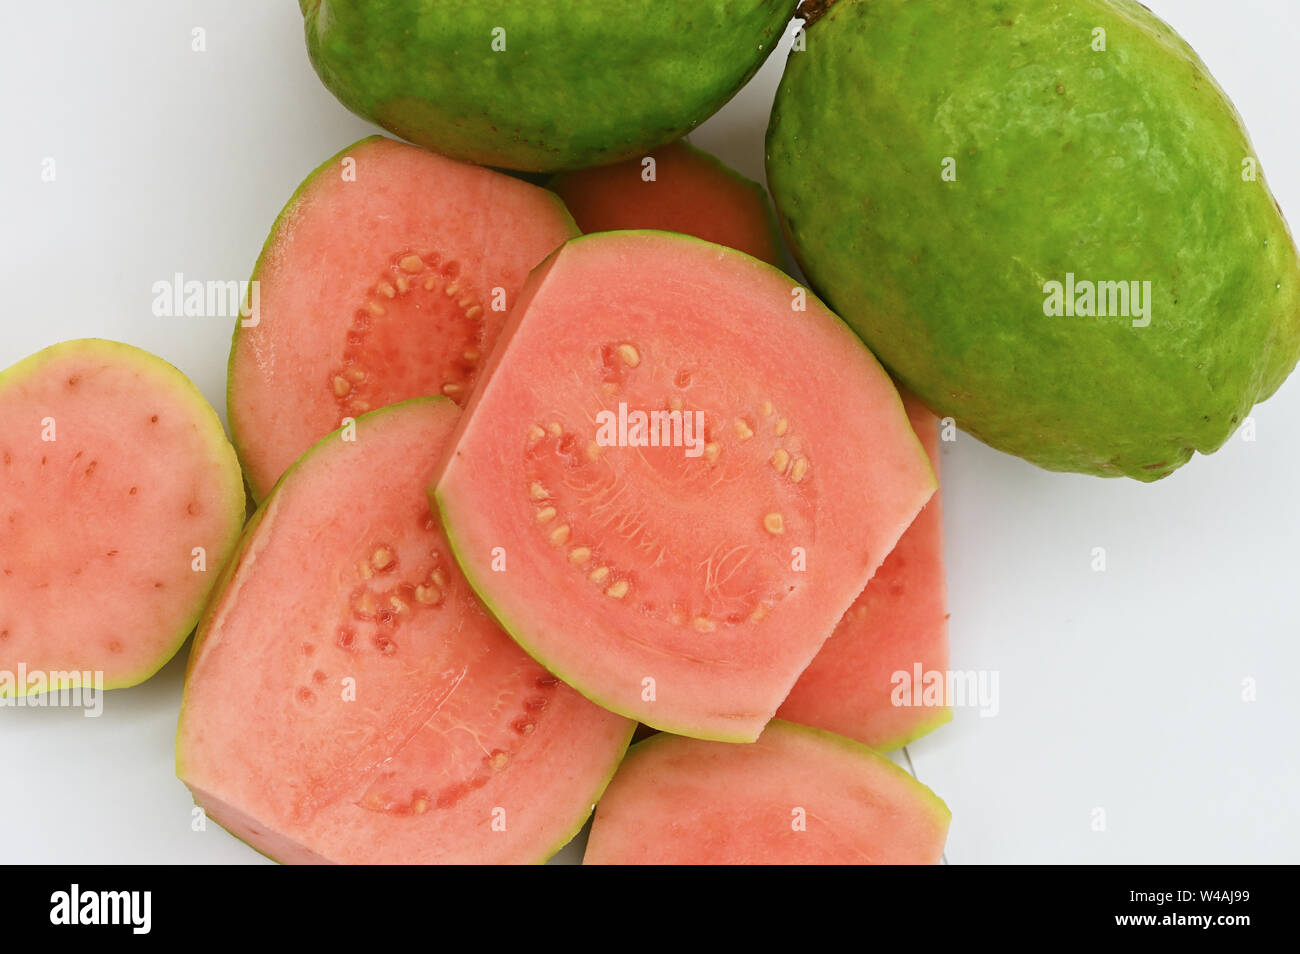 Close up of guavas whole and sliced Stock Photo